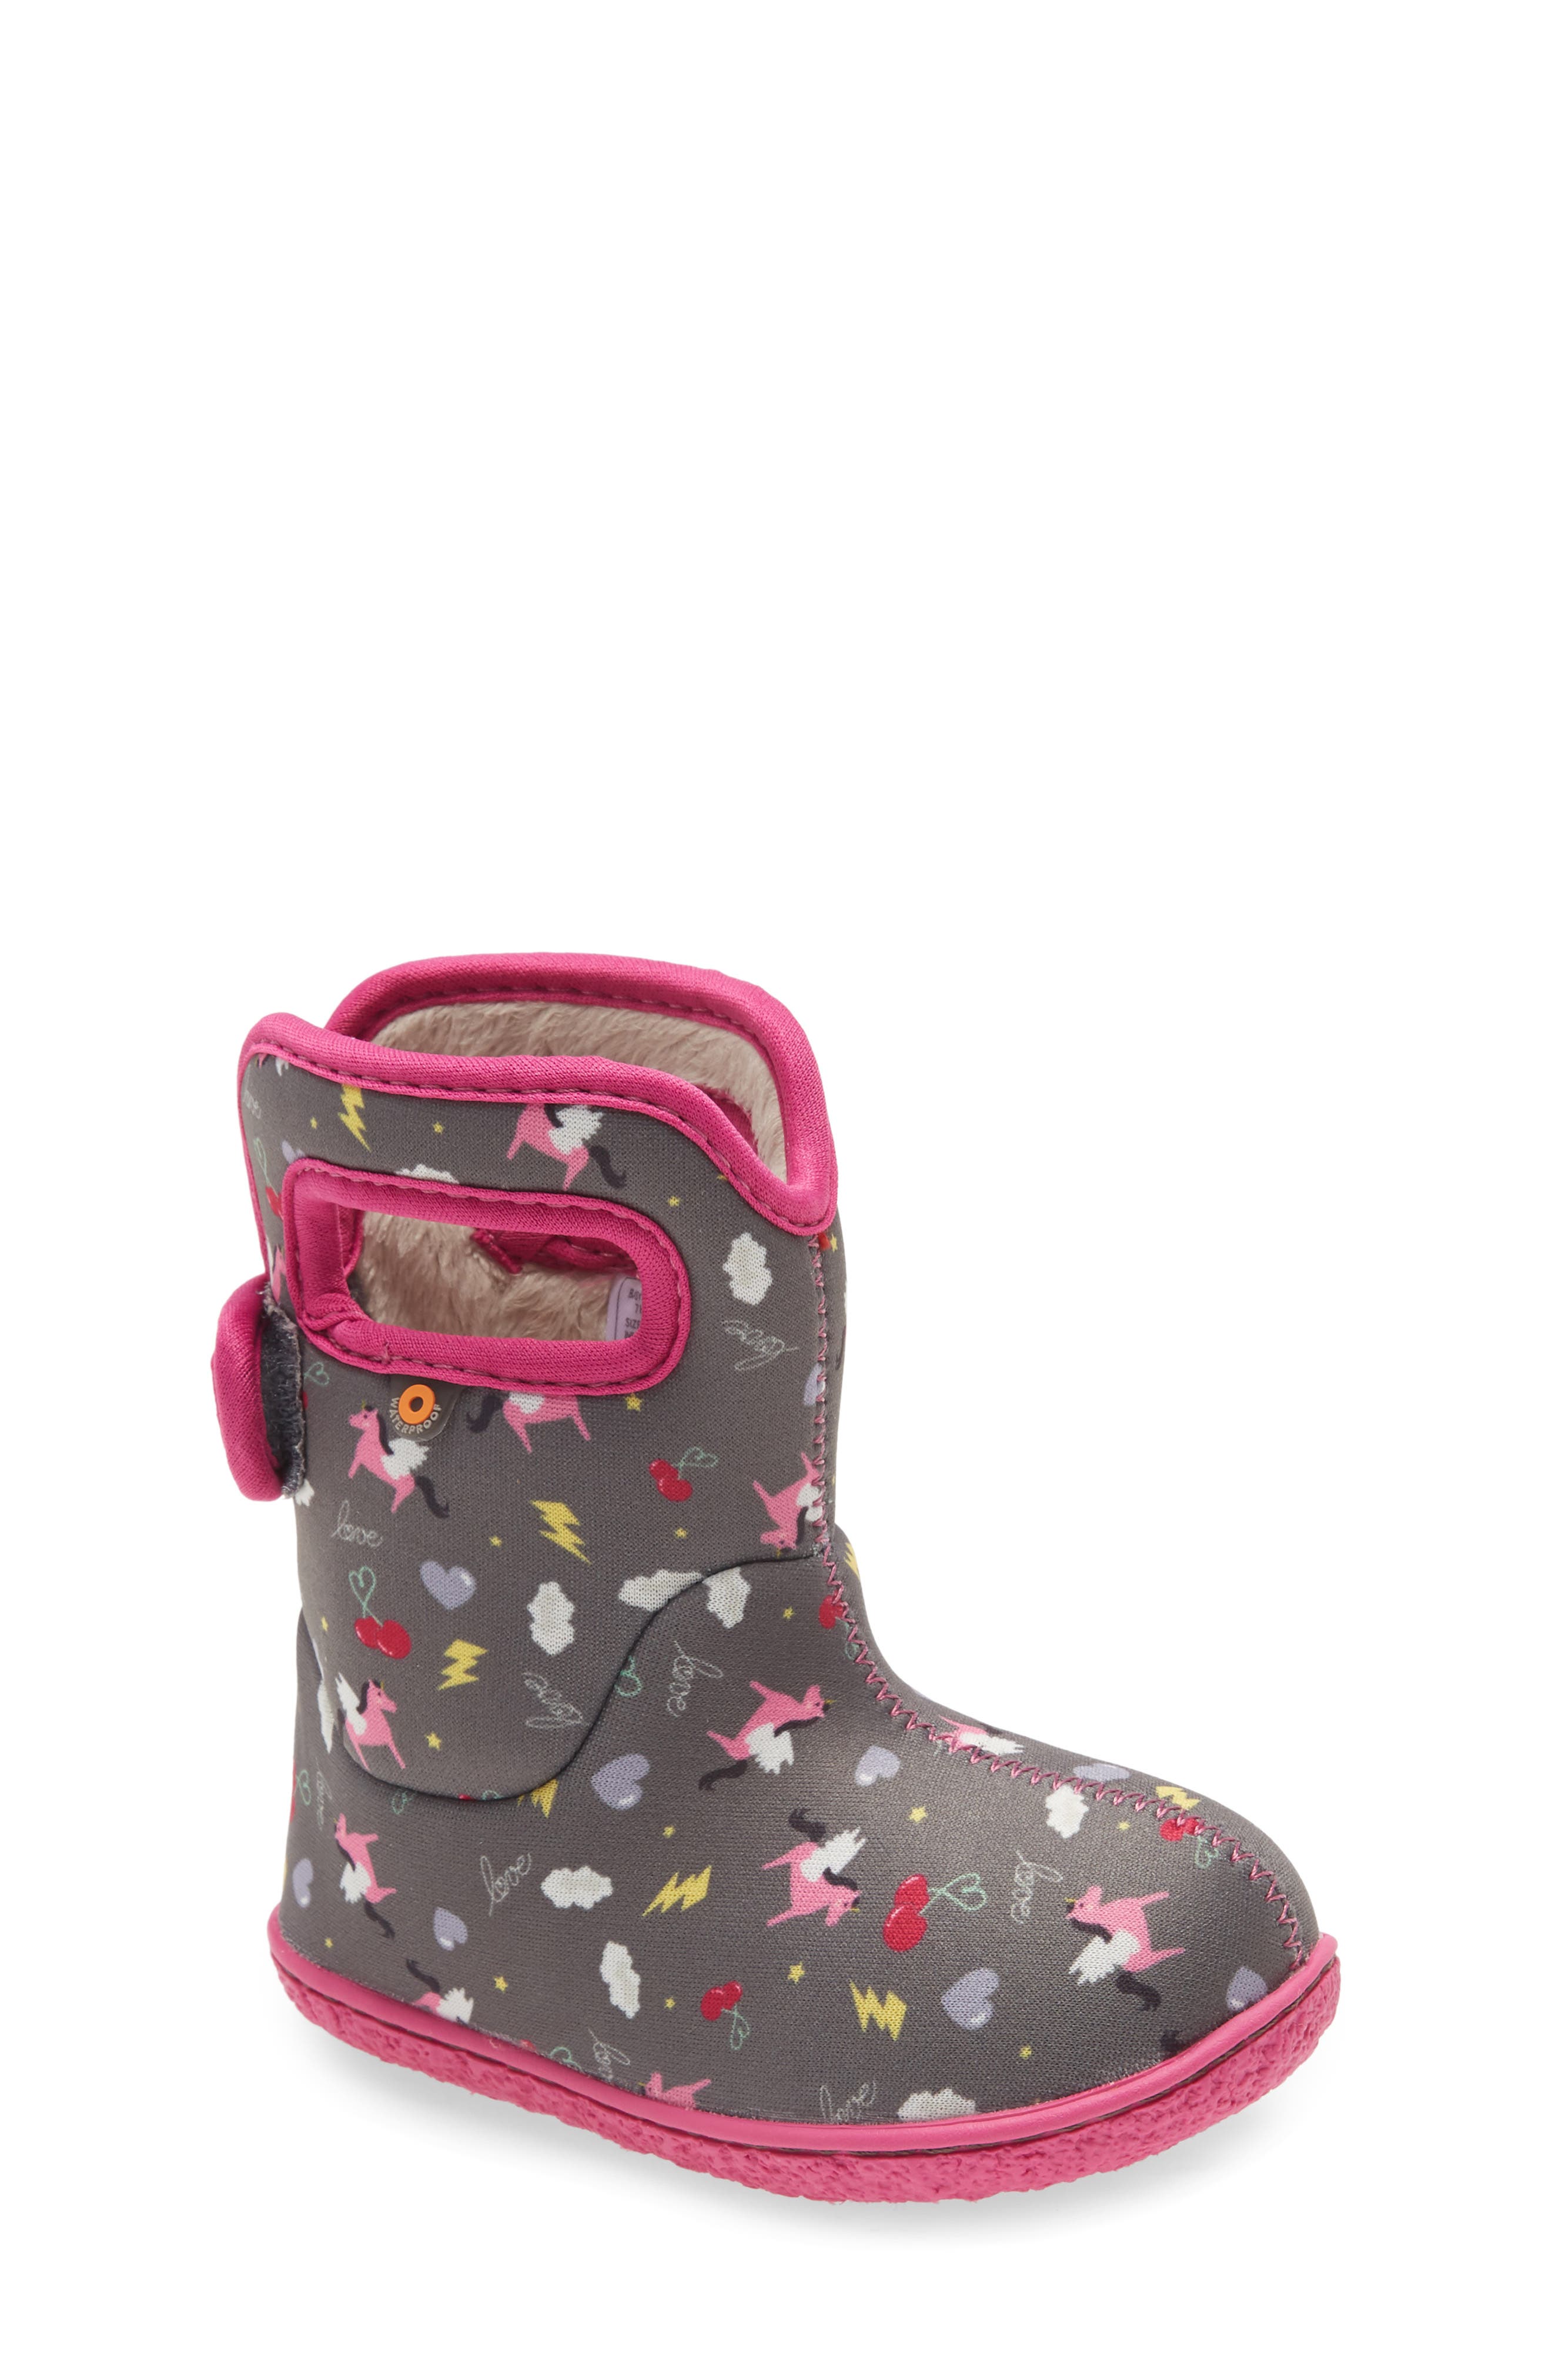 Bogs Shoes for Babies | Nordstrom